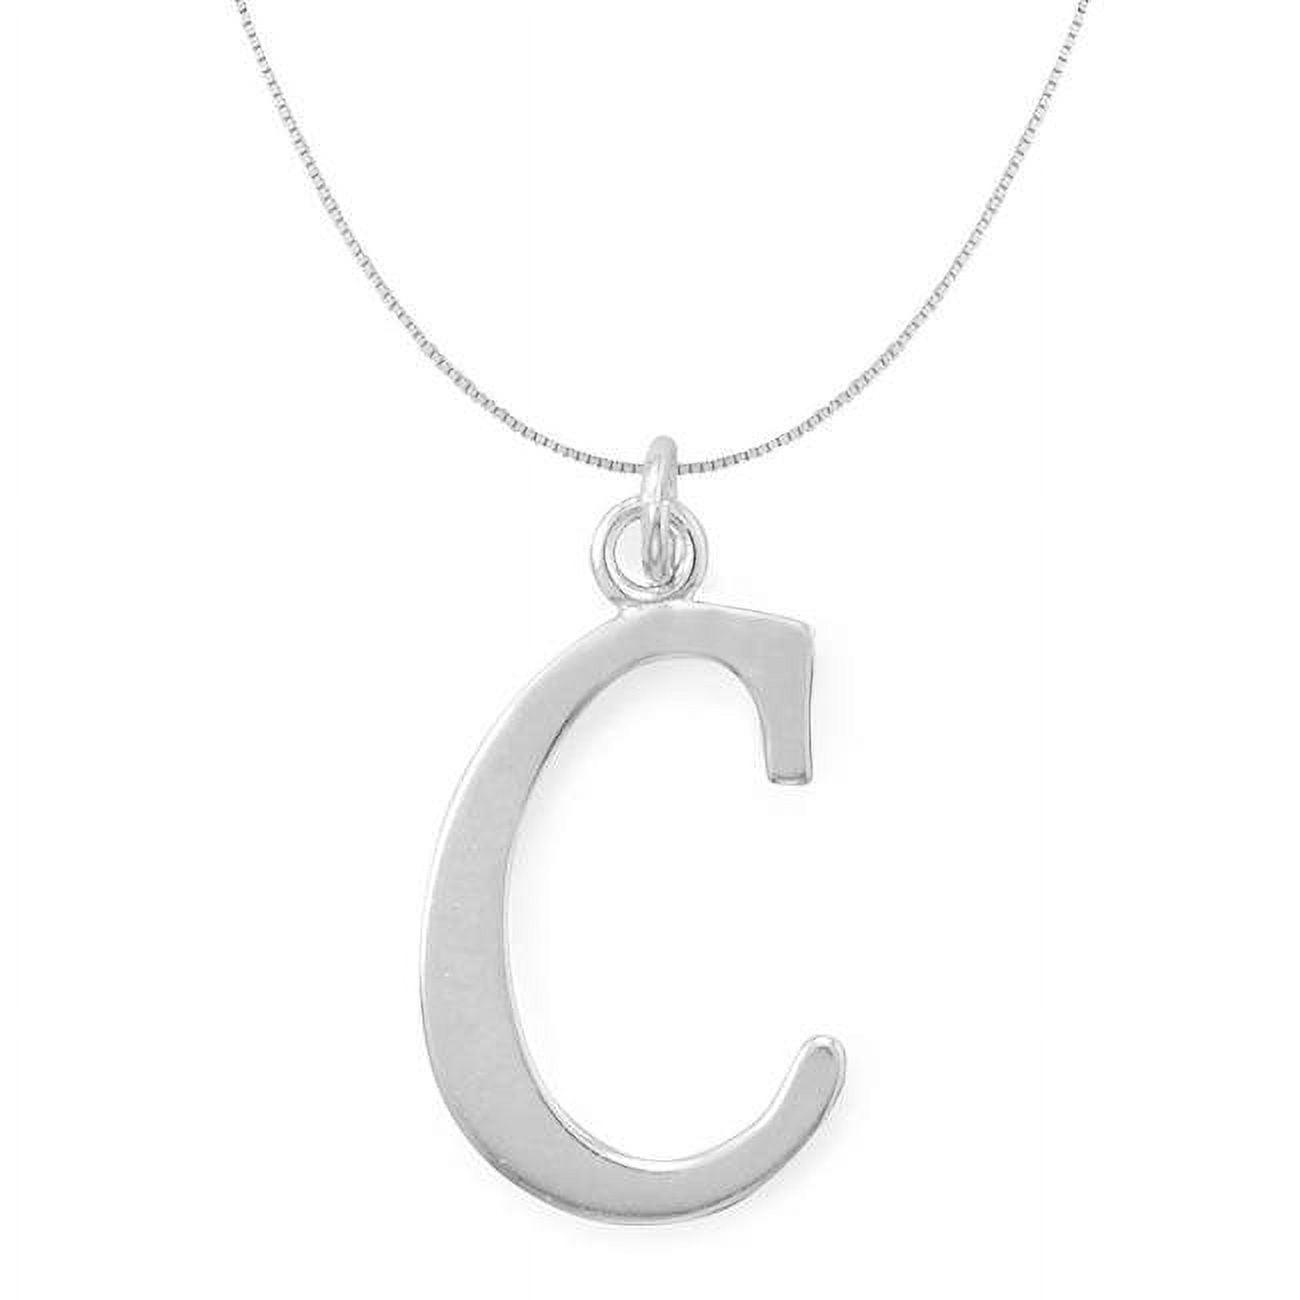 74661c-20 20 In. Sterling Silver Initial Letter C Pendant With 0.70 Mm Thin Box Chain